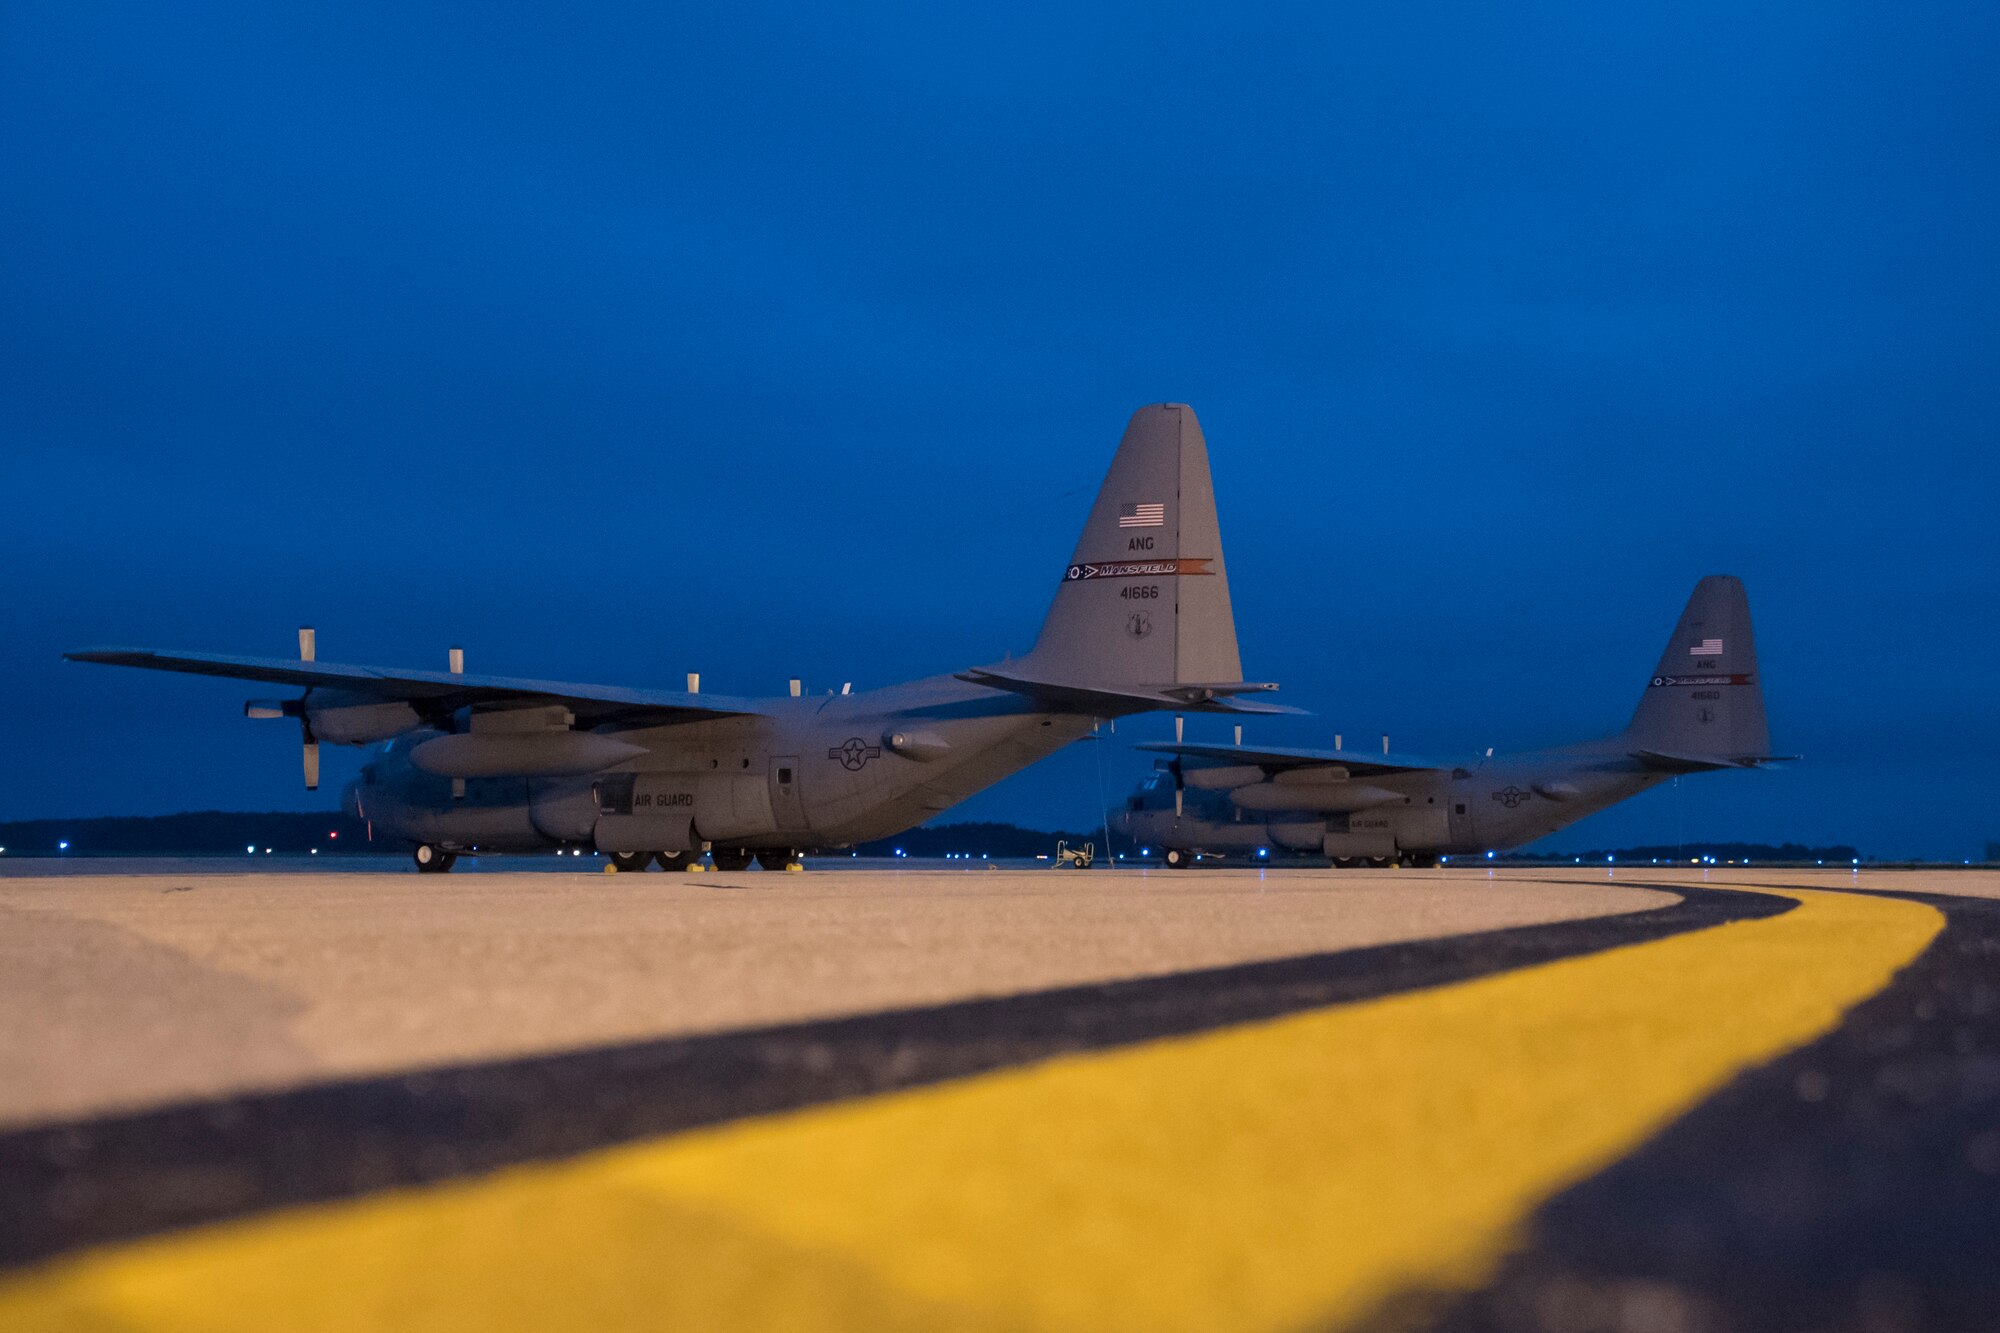 A photo of two C-130's on the flight line early morning against a dark blue sky.